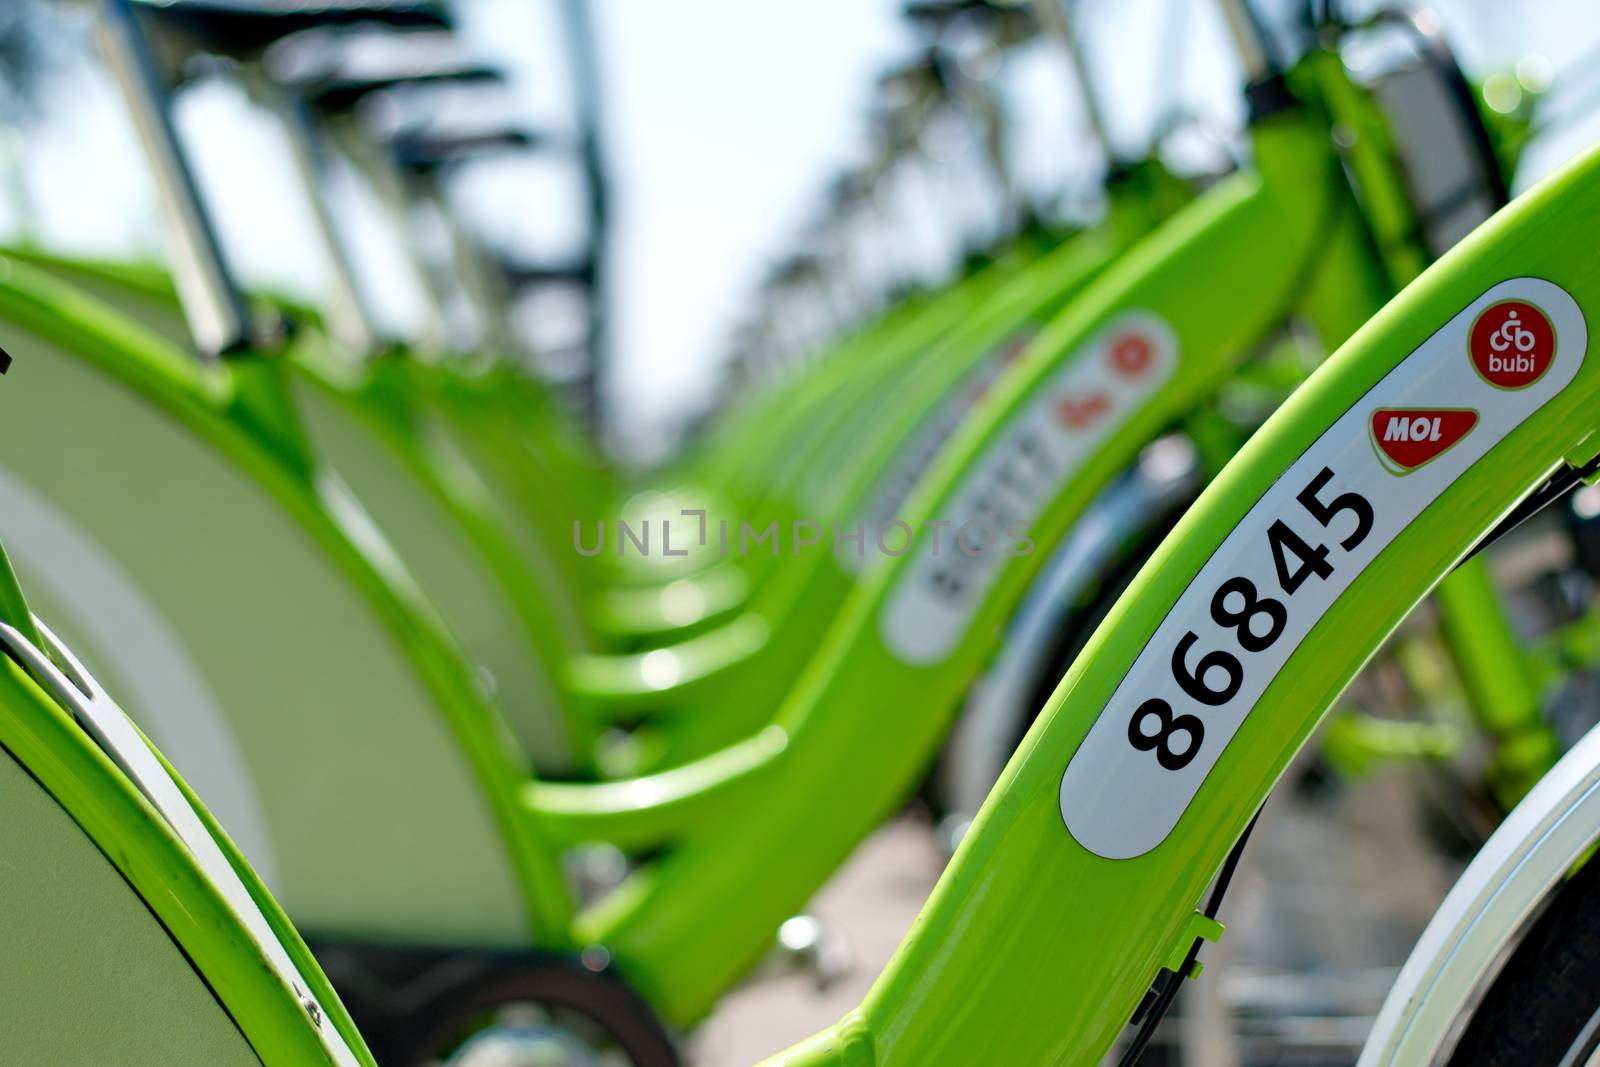 BUDAPEST, HUNGARY - JUNE 01 2014:New Budapest bike hire called "BUBI".Many cities around the world have bicycle sharing systems or community bicycle programs.